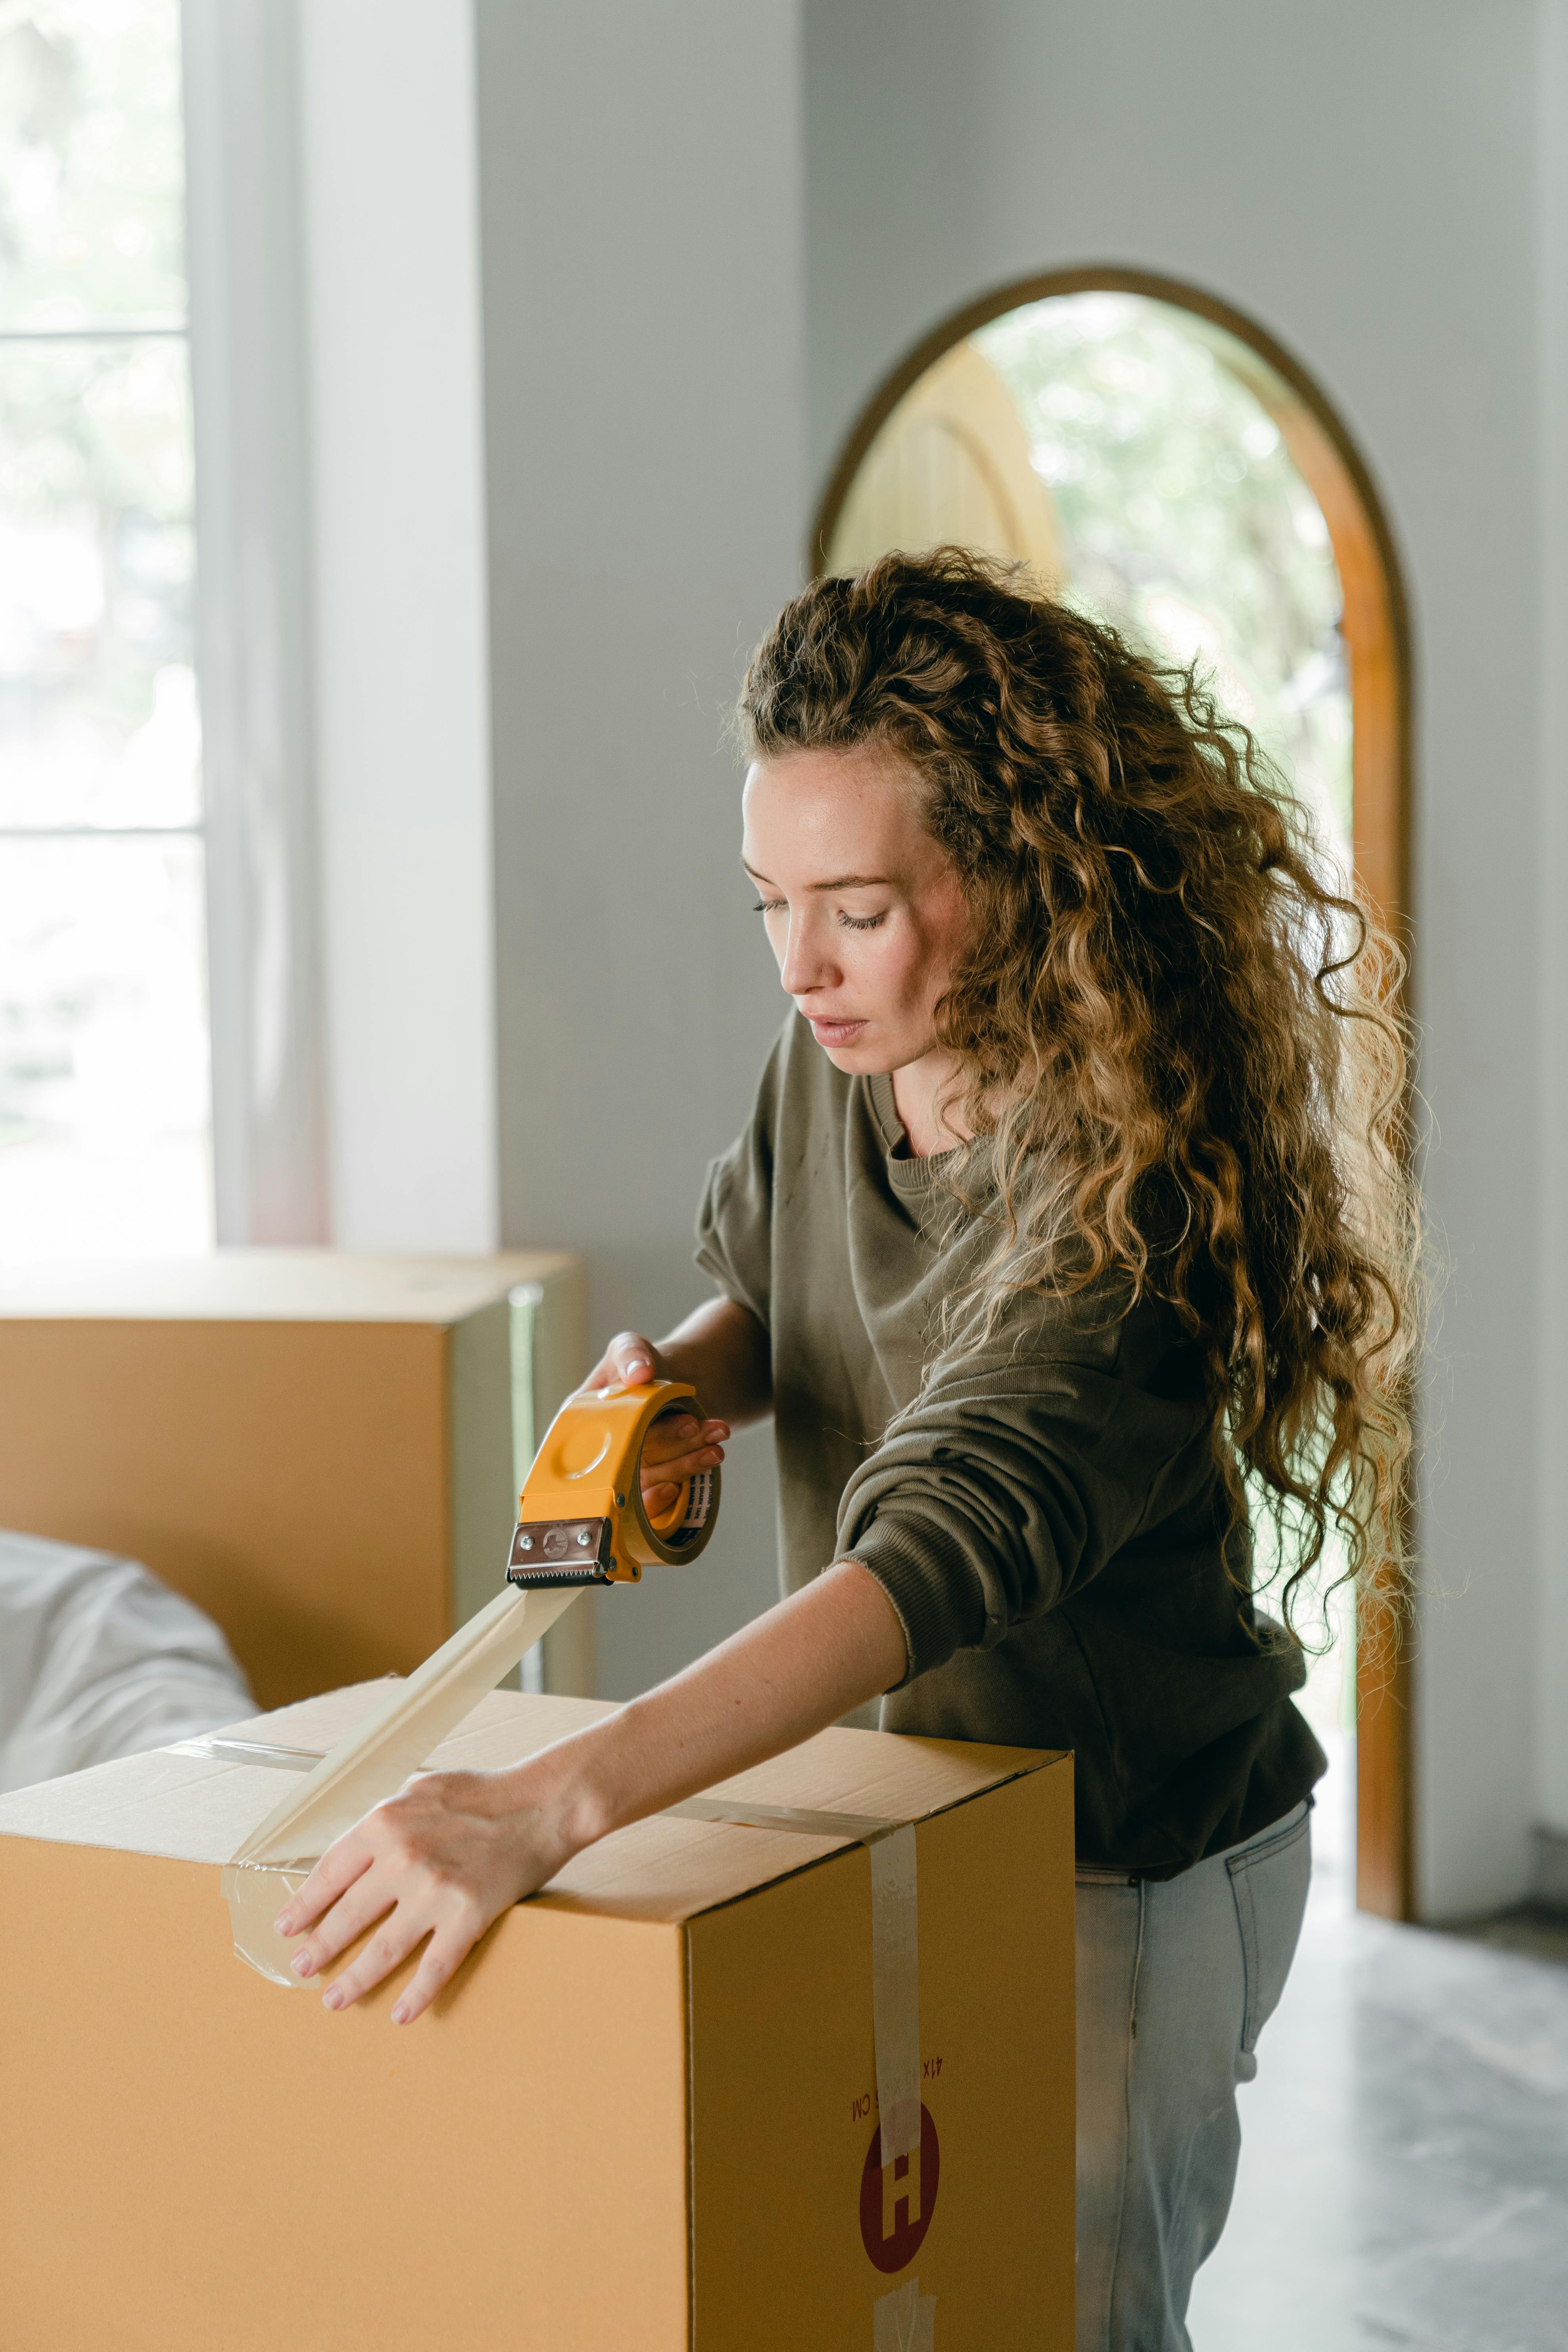 A young woman packing moving boxes | Source: Ketut Subiyanto on Pexels